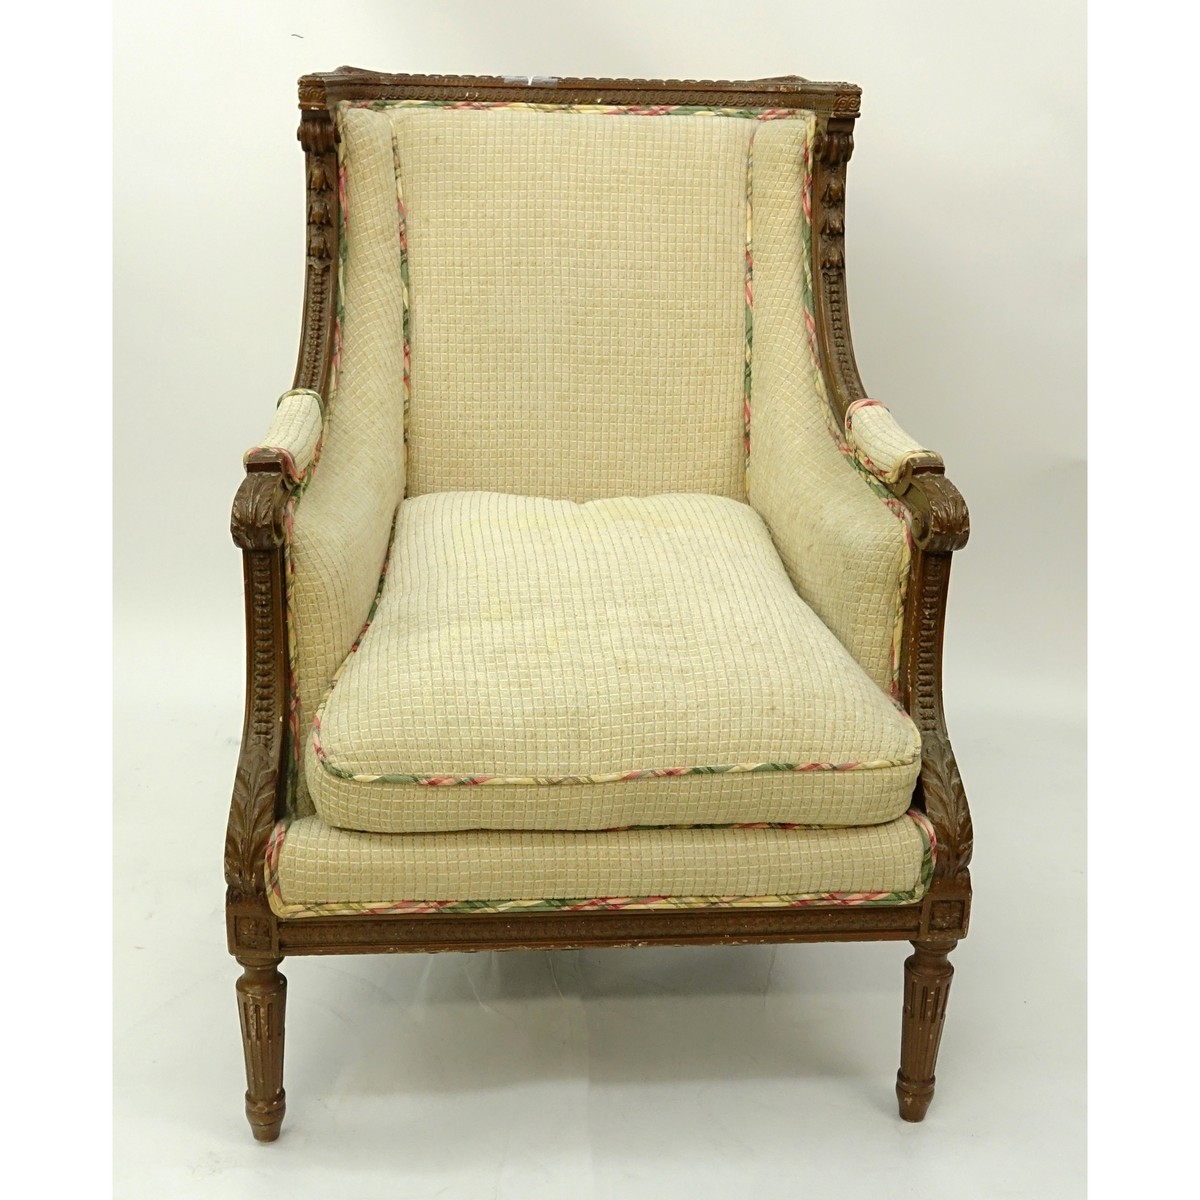 19/20th Century French Louis XVI Style Carved Wood and Upholstered Bergere. Neoclassical details of florals and fluted legs.